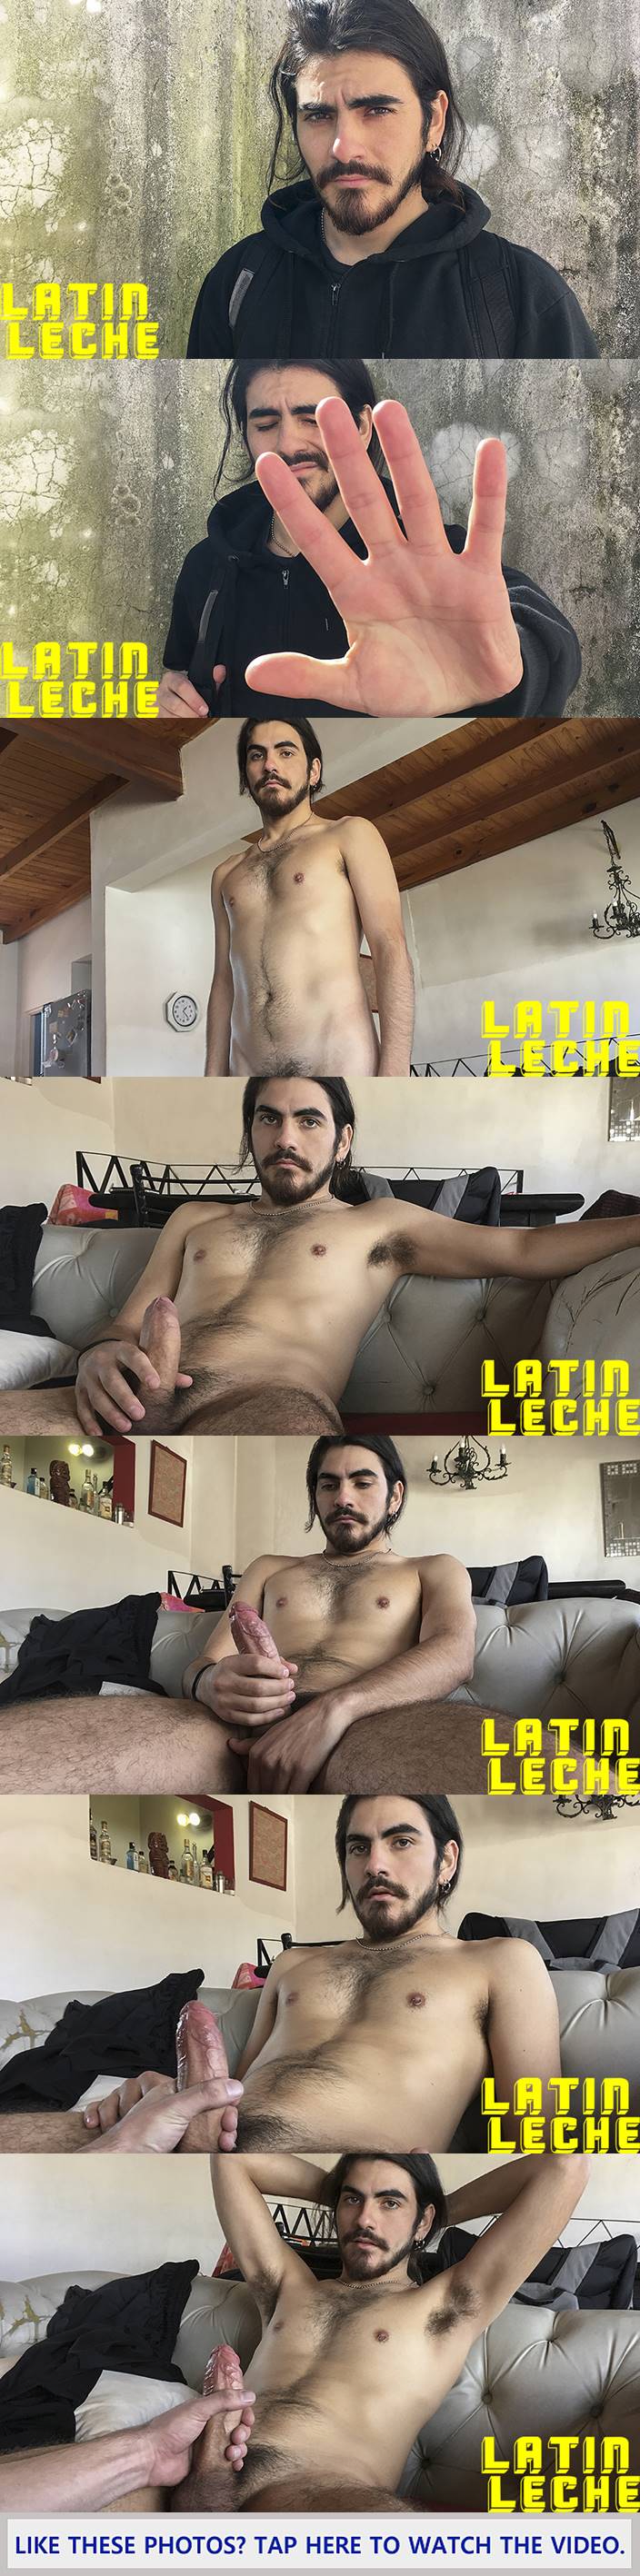 Latin Leche: Numero 92 - The Cute Hipster Guy